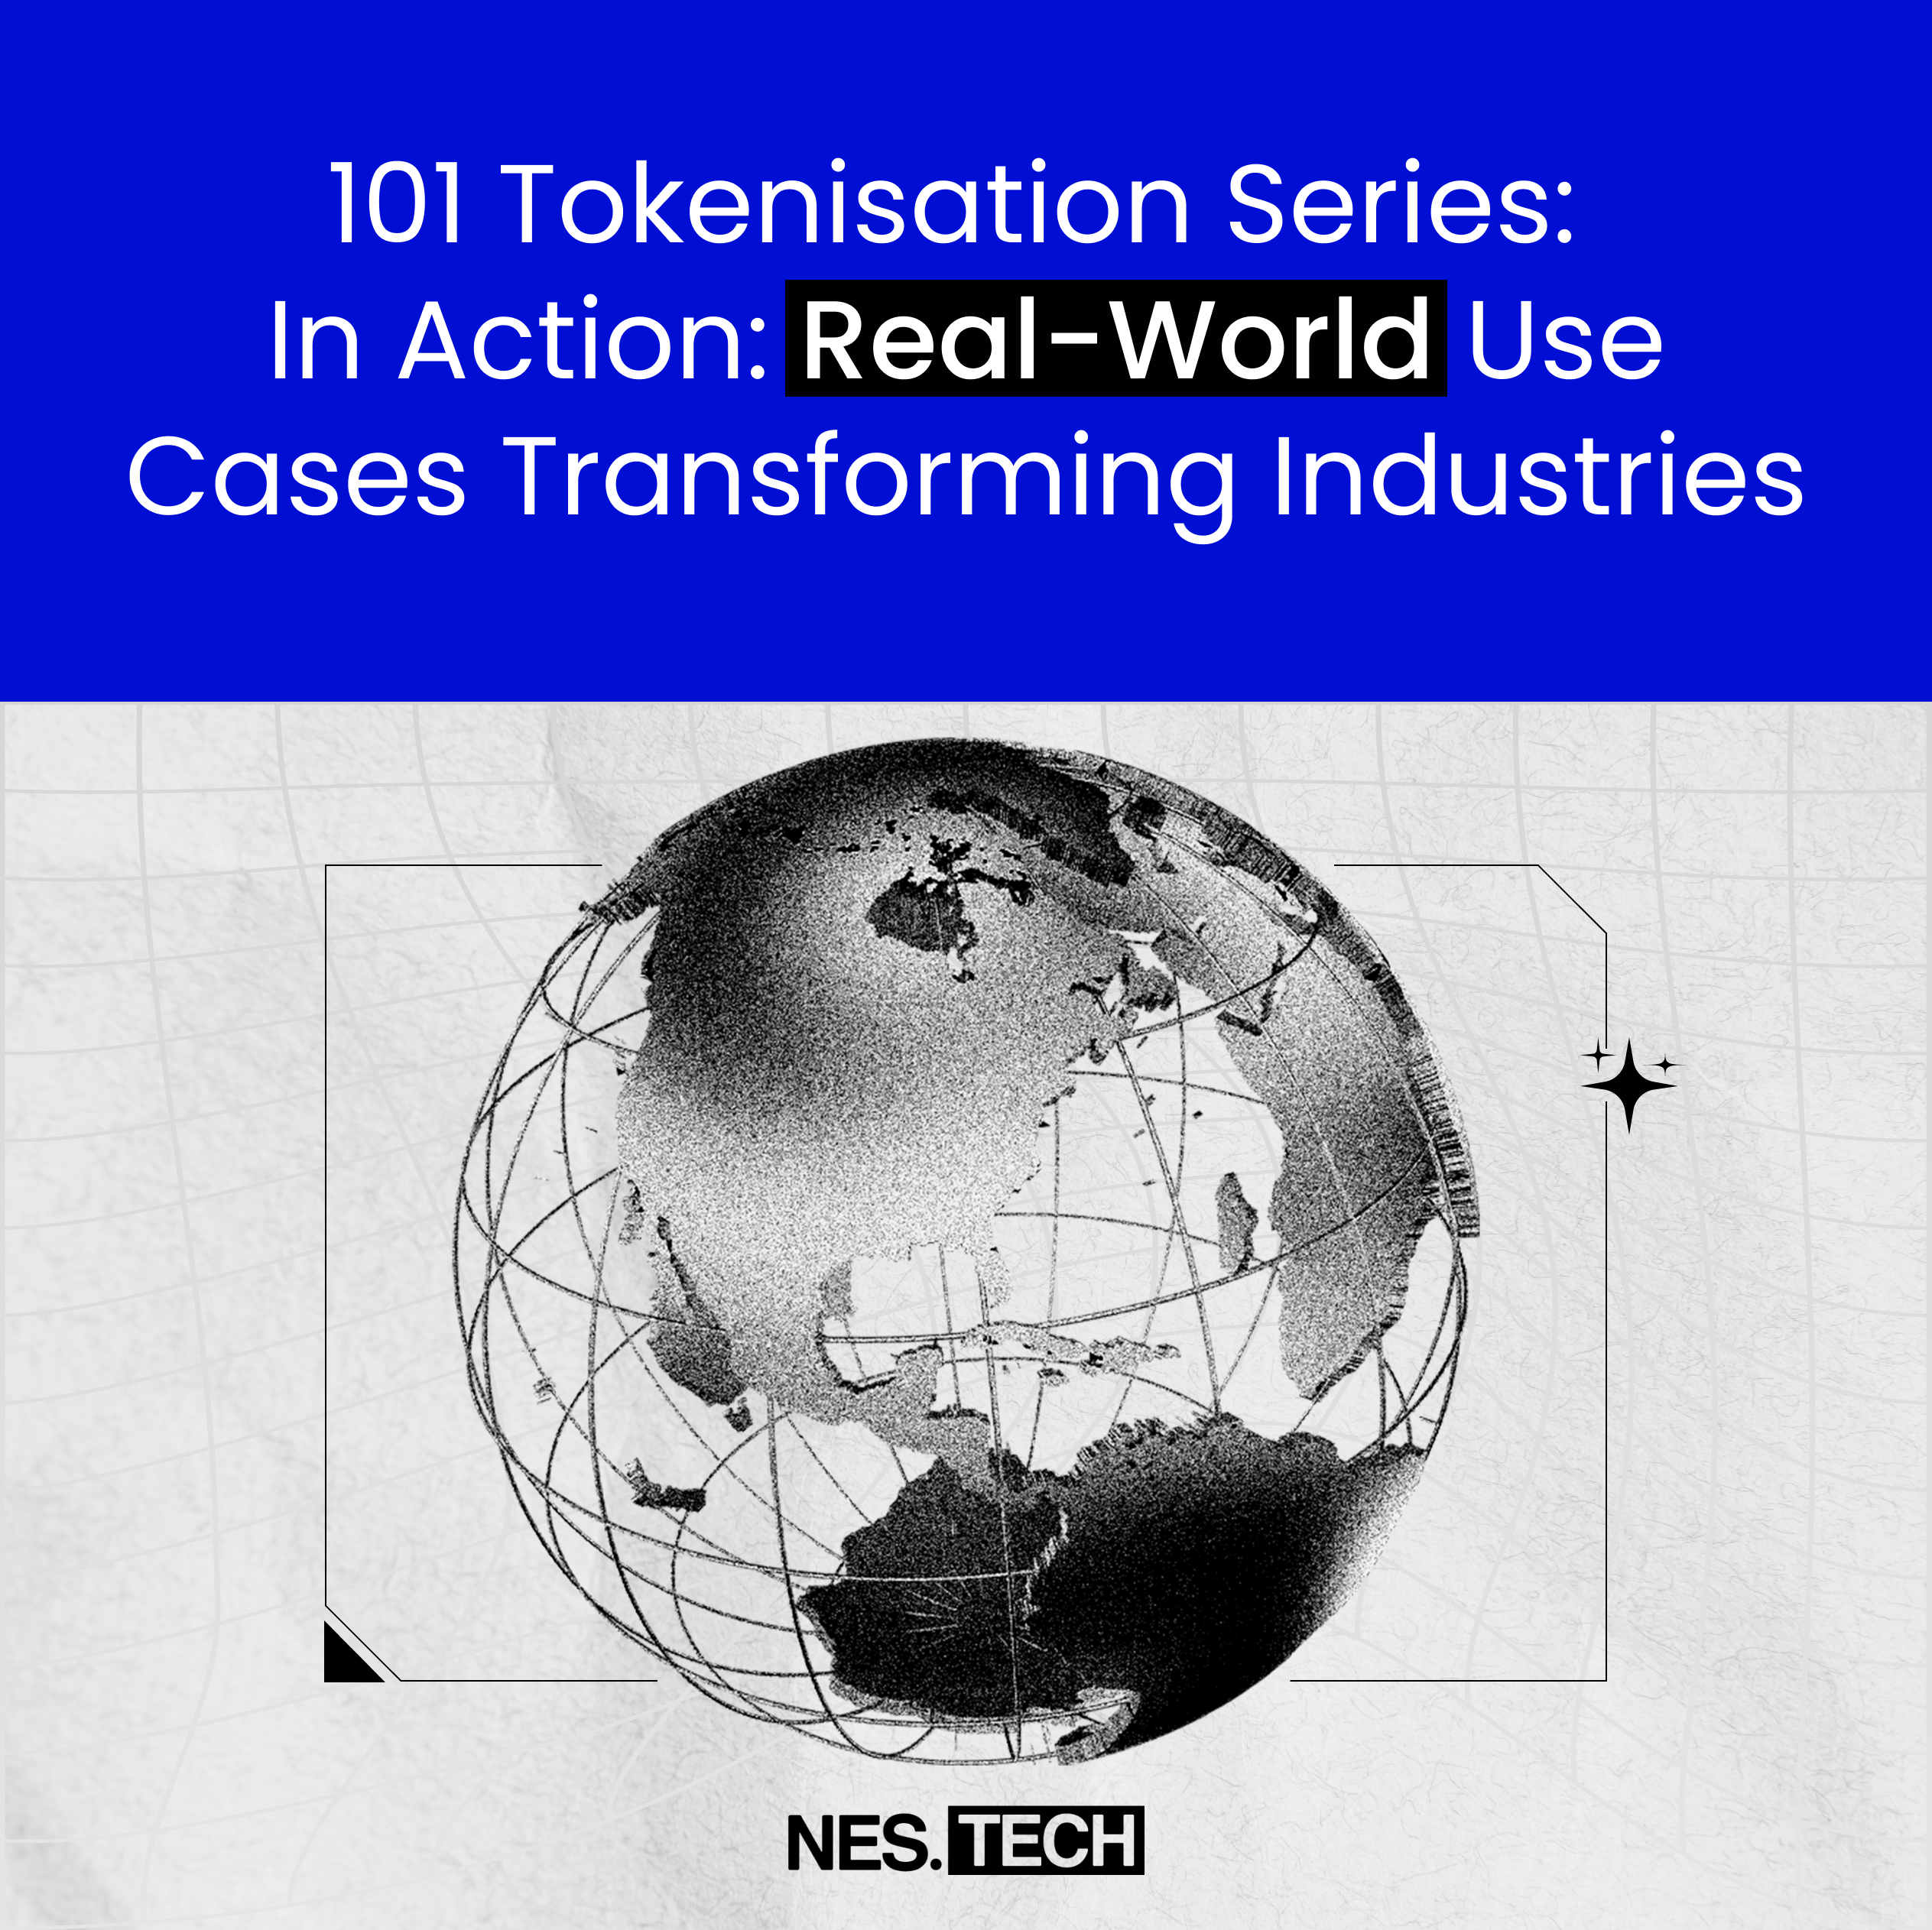 6 Real-World Examples Transforming Industries in Tokenization